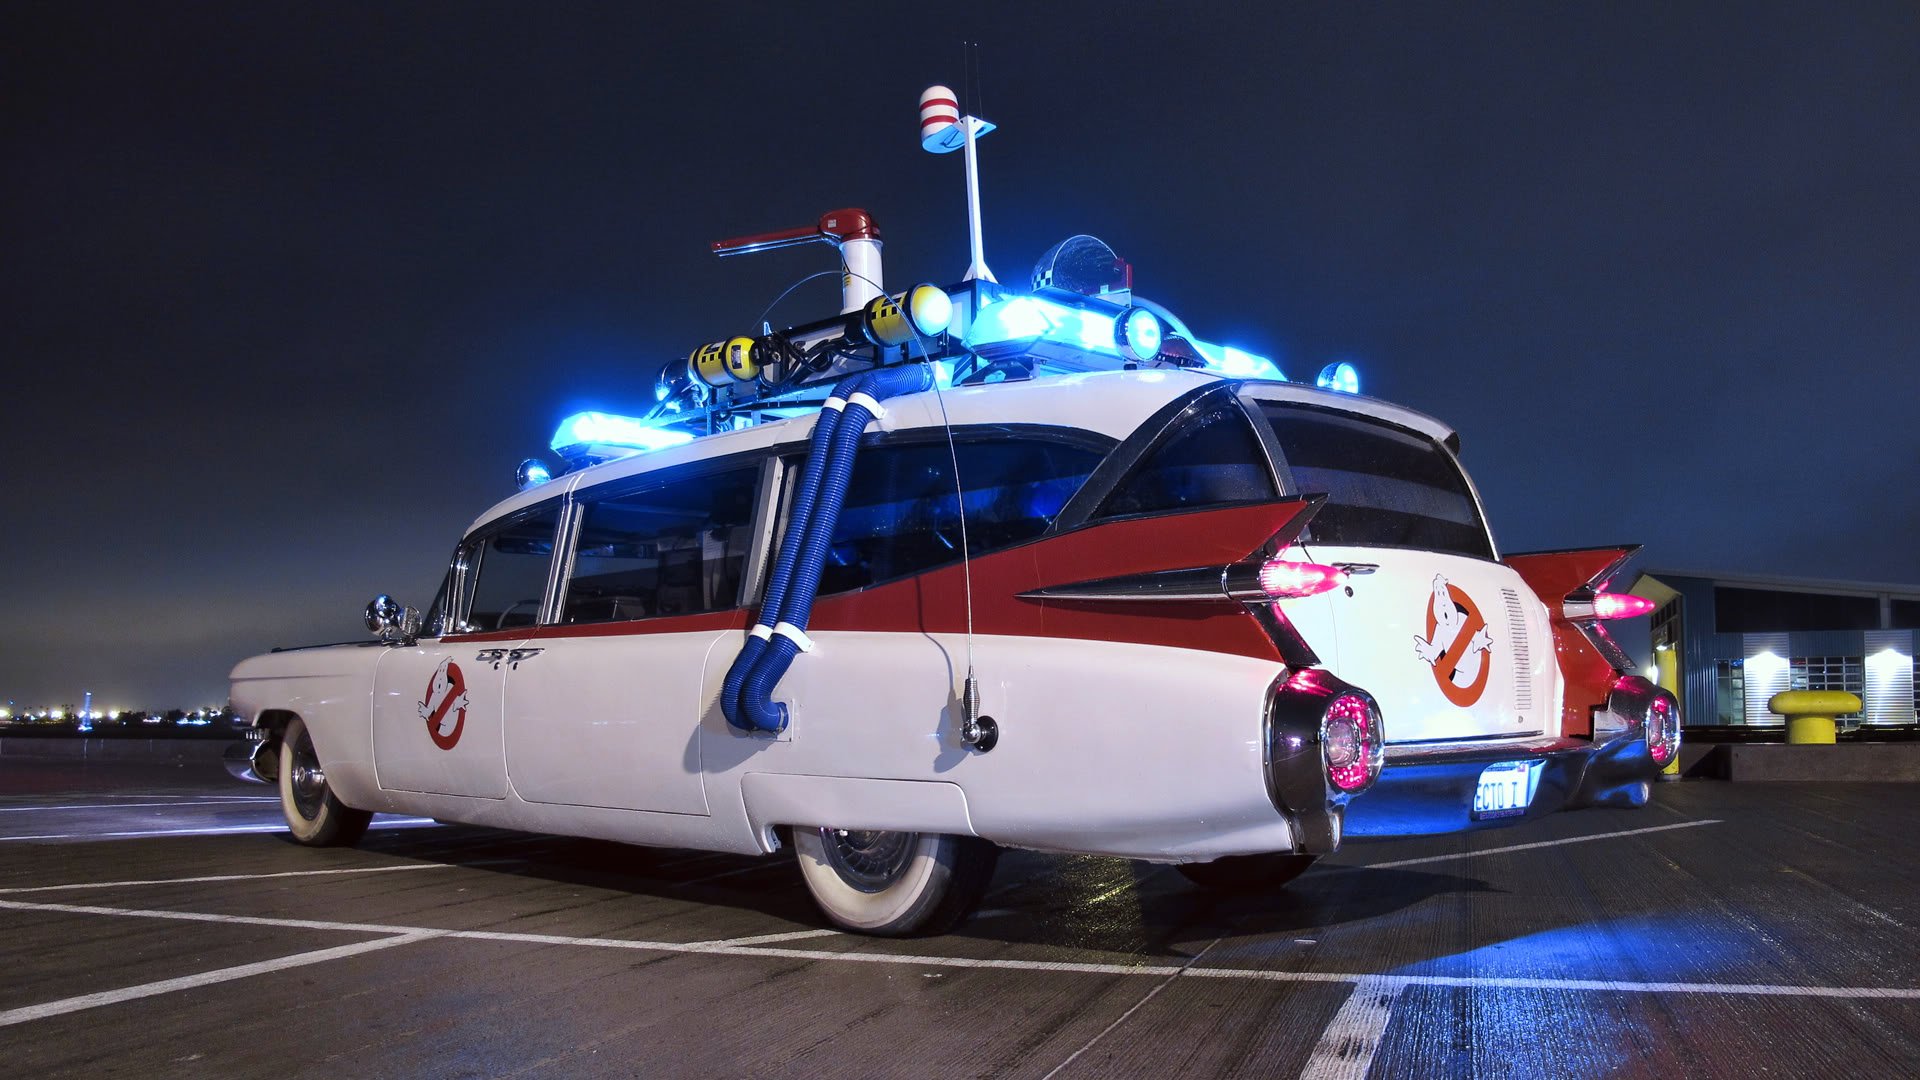 ghostbusters, Action, Adventure, Supernatural, Comedy, Ghost, Ambulance, Emergency Wallpaper